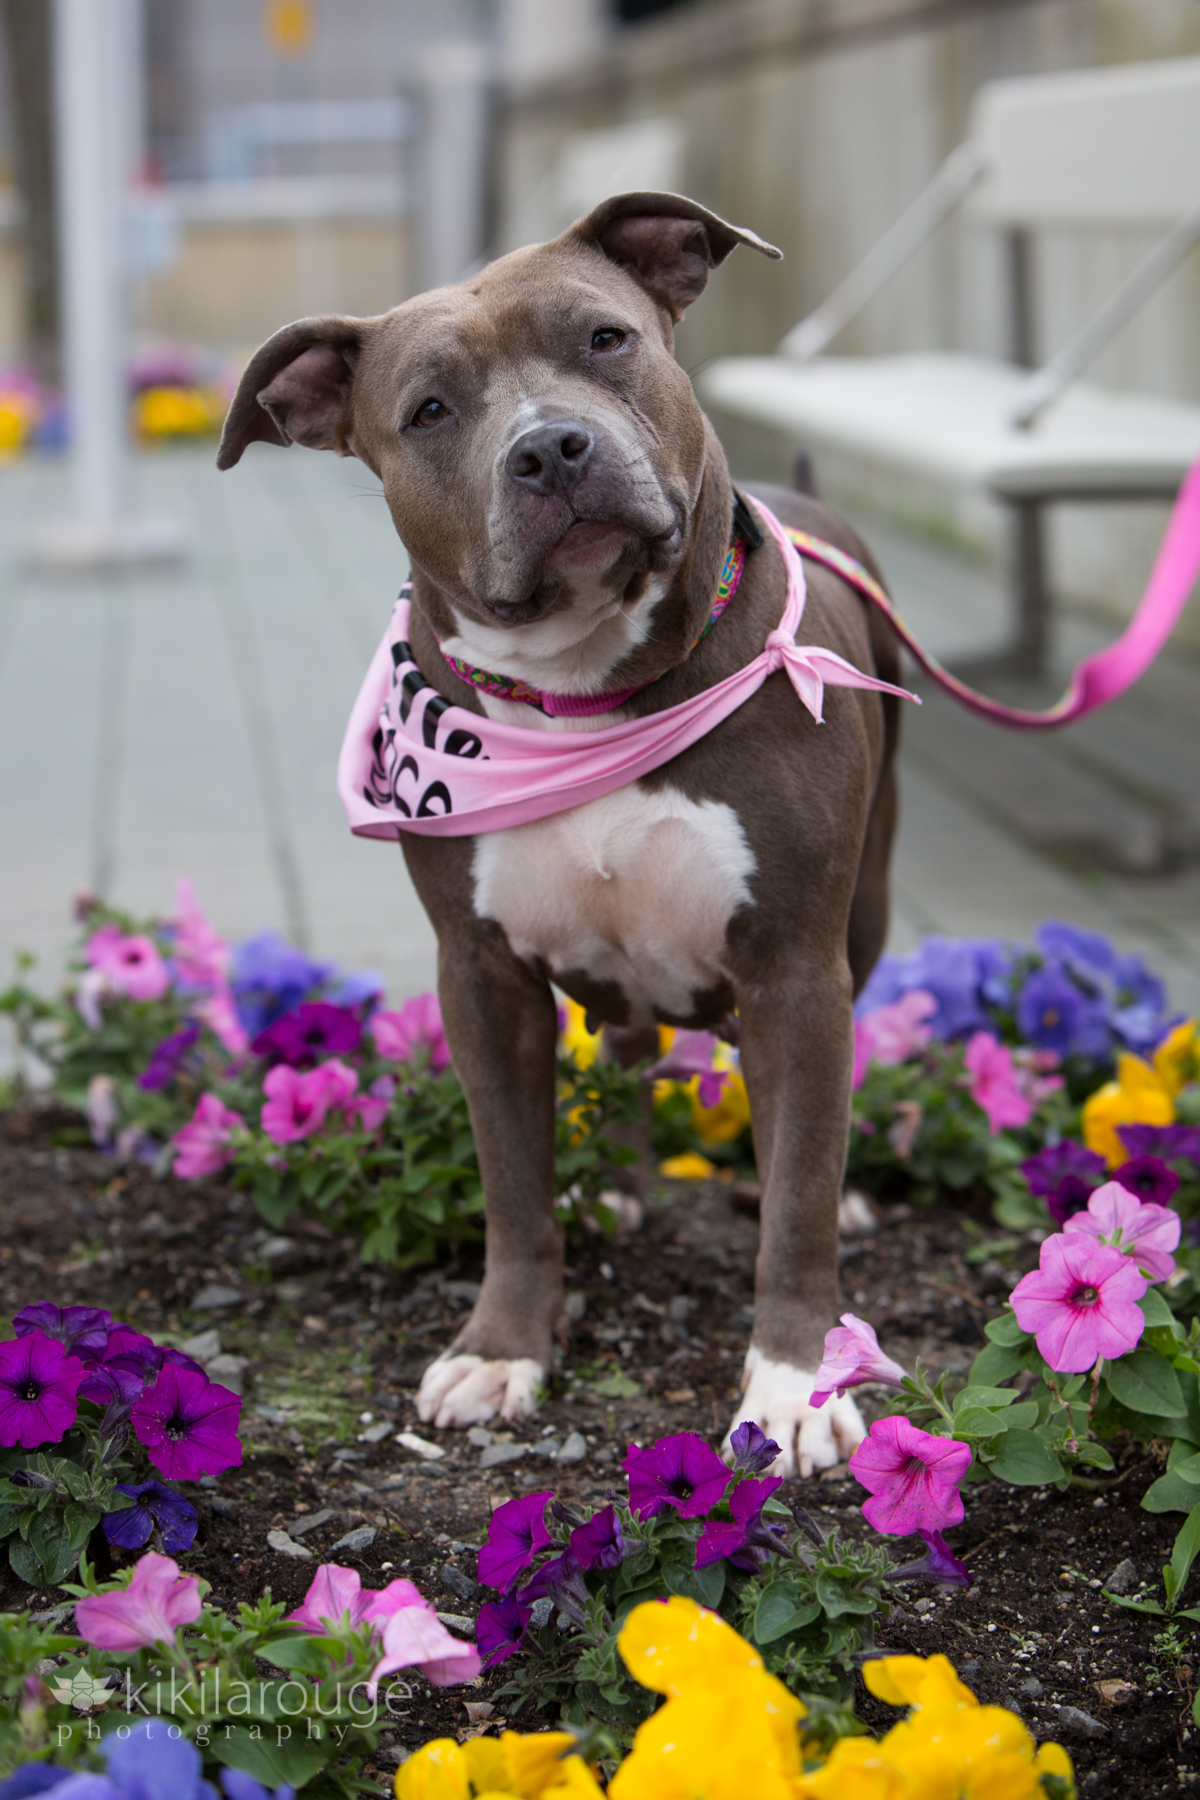 Brown + white rescue dog with pink bandana in petunias